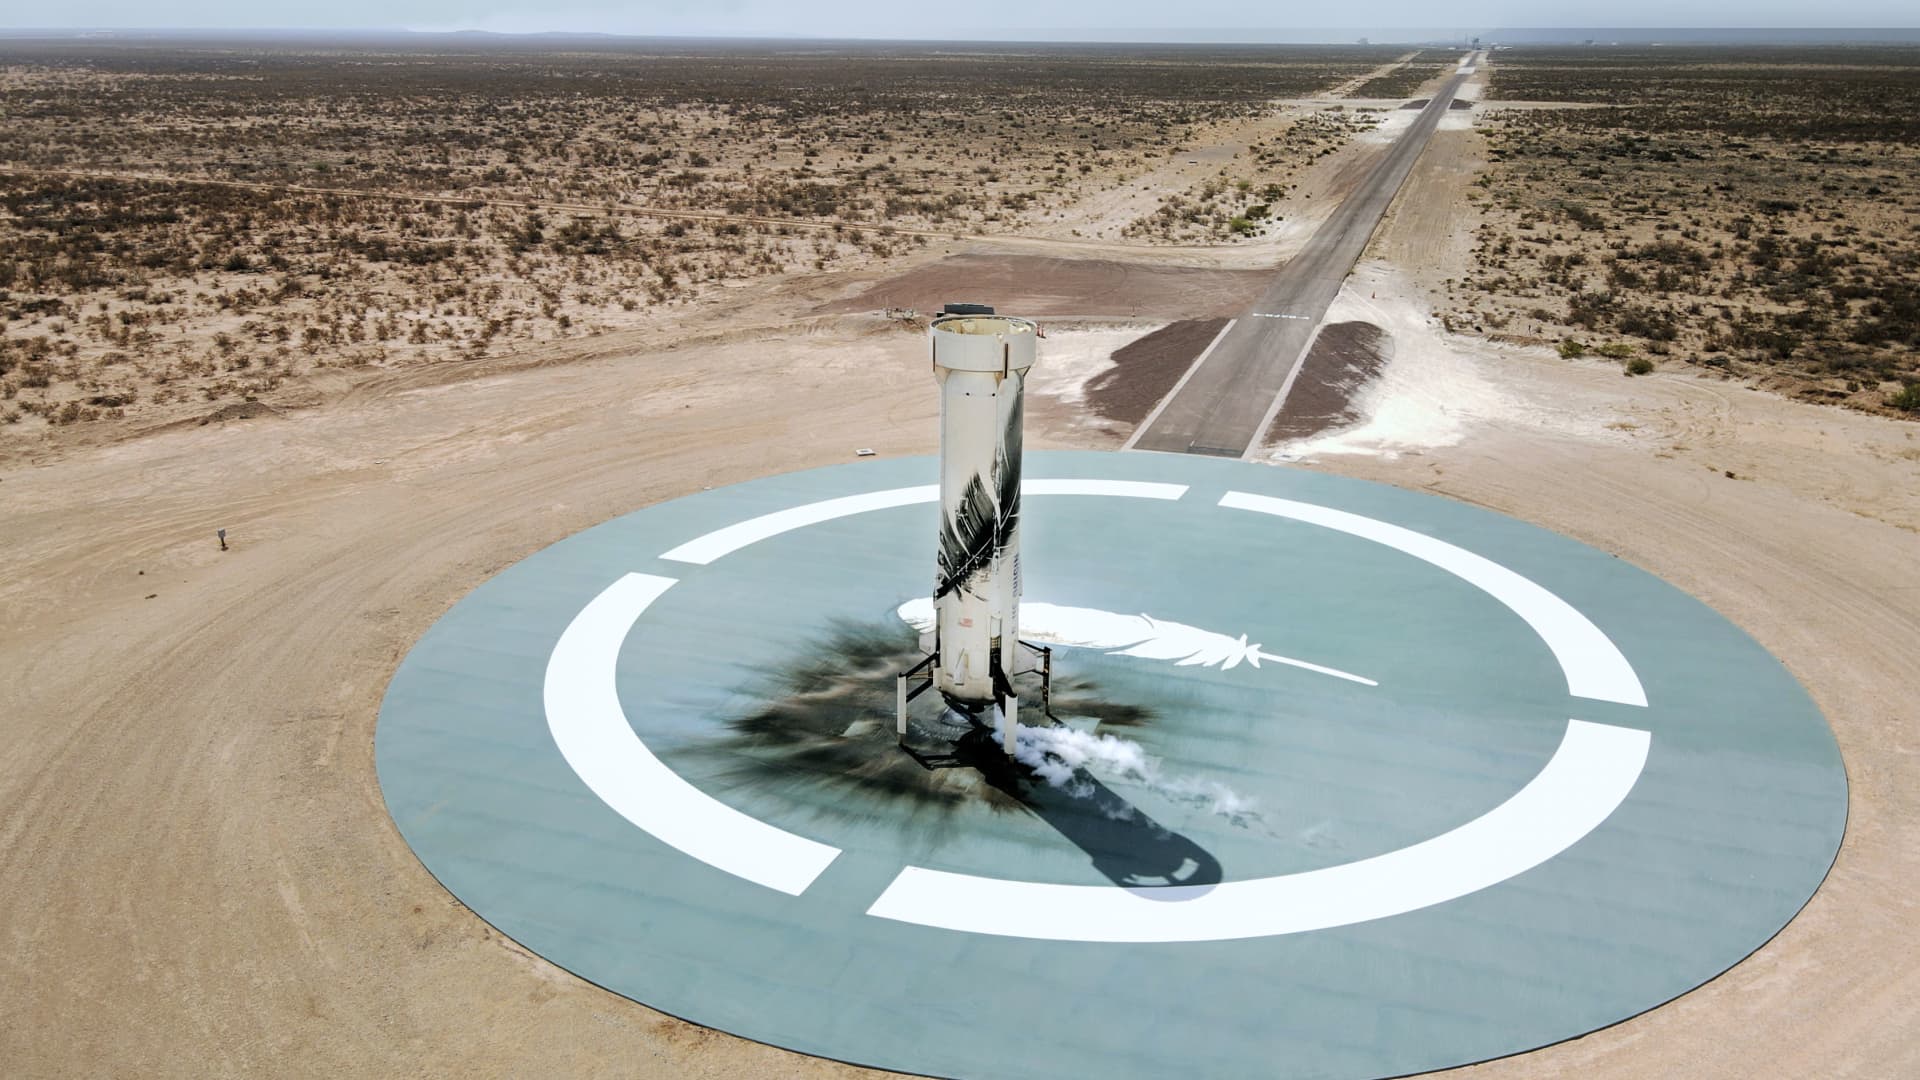 The New Shepard booster on the landing pad after NS-15's successful mission on April 14, 2021.